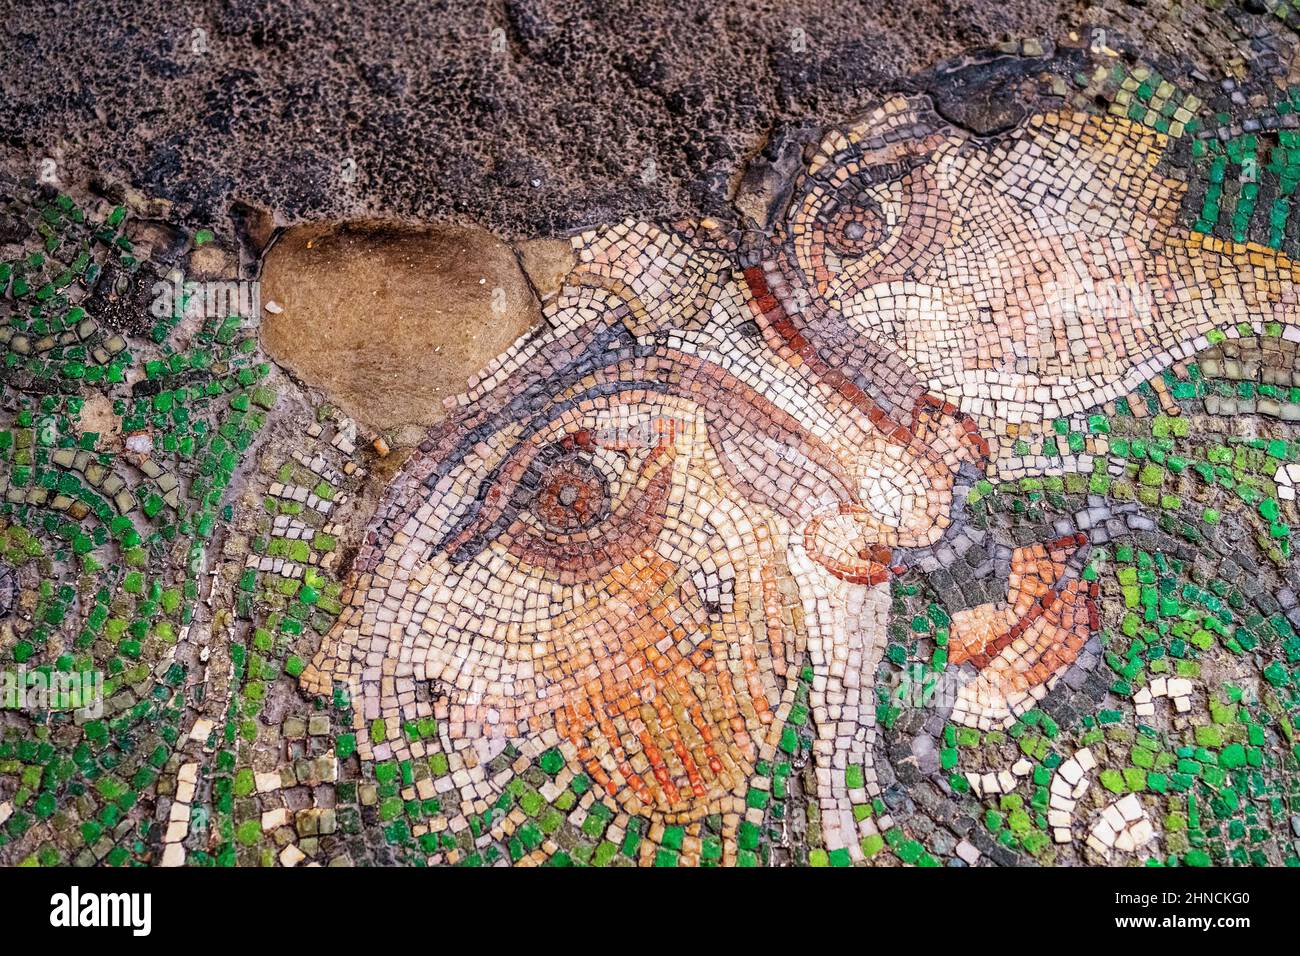 Mosaic work of a man face with acanthus leaves from the Byzantine period (East Roman period) at the Great Palace of Constantinople. 4th-6th century. Stock Photo